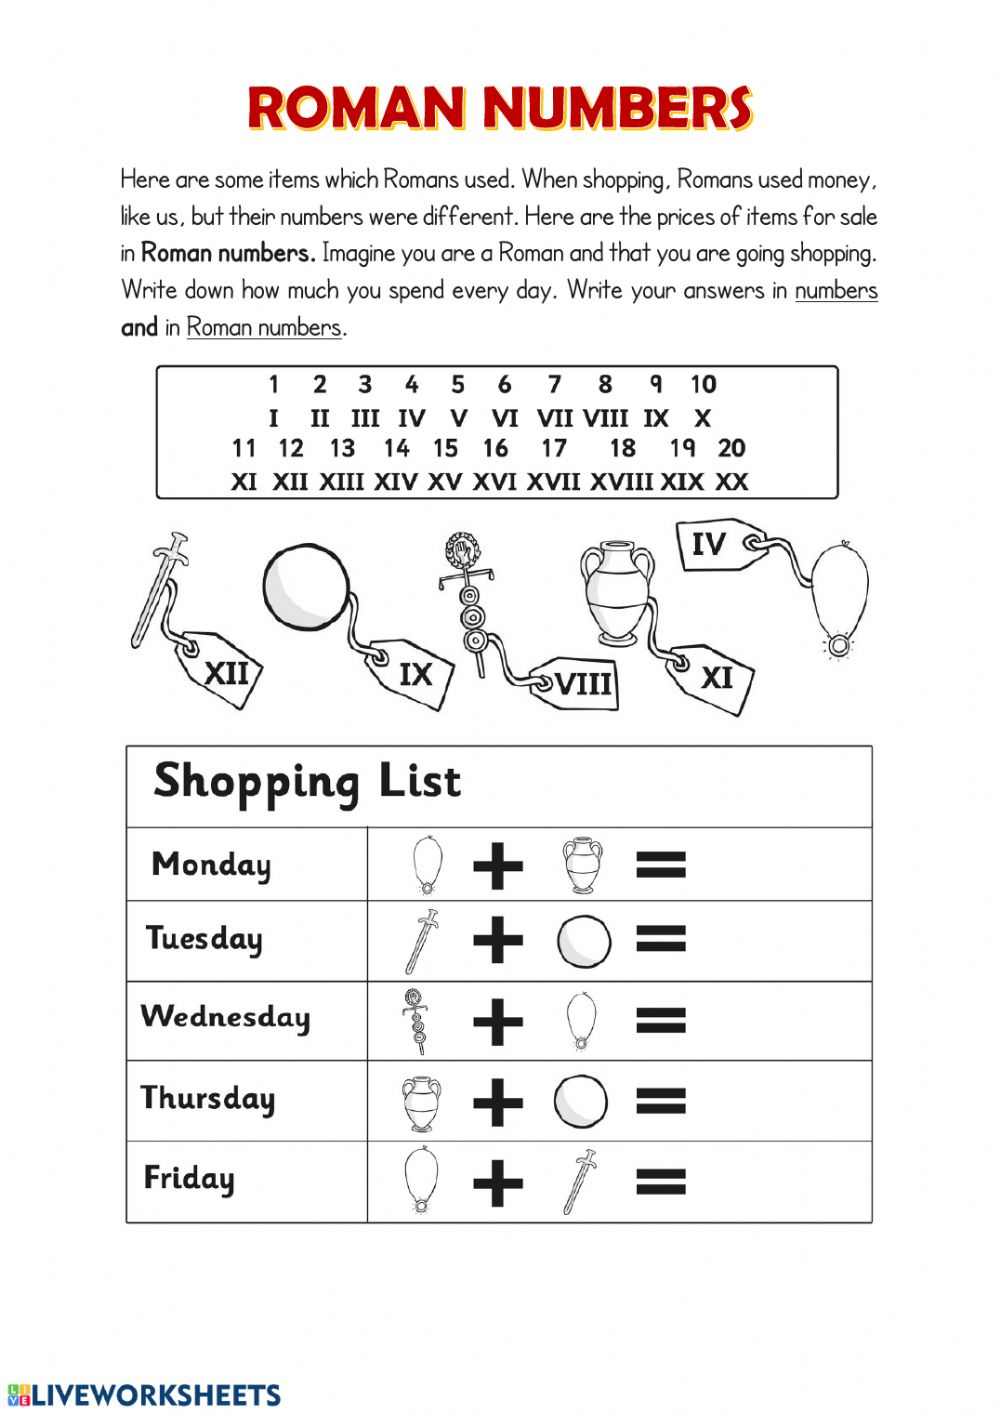 free-printable-advanced-history-worksheets-roman-numerals